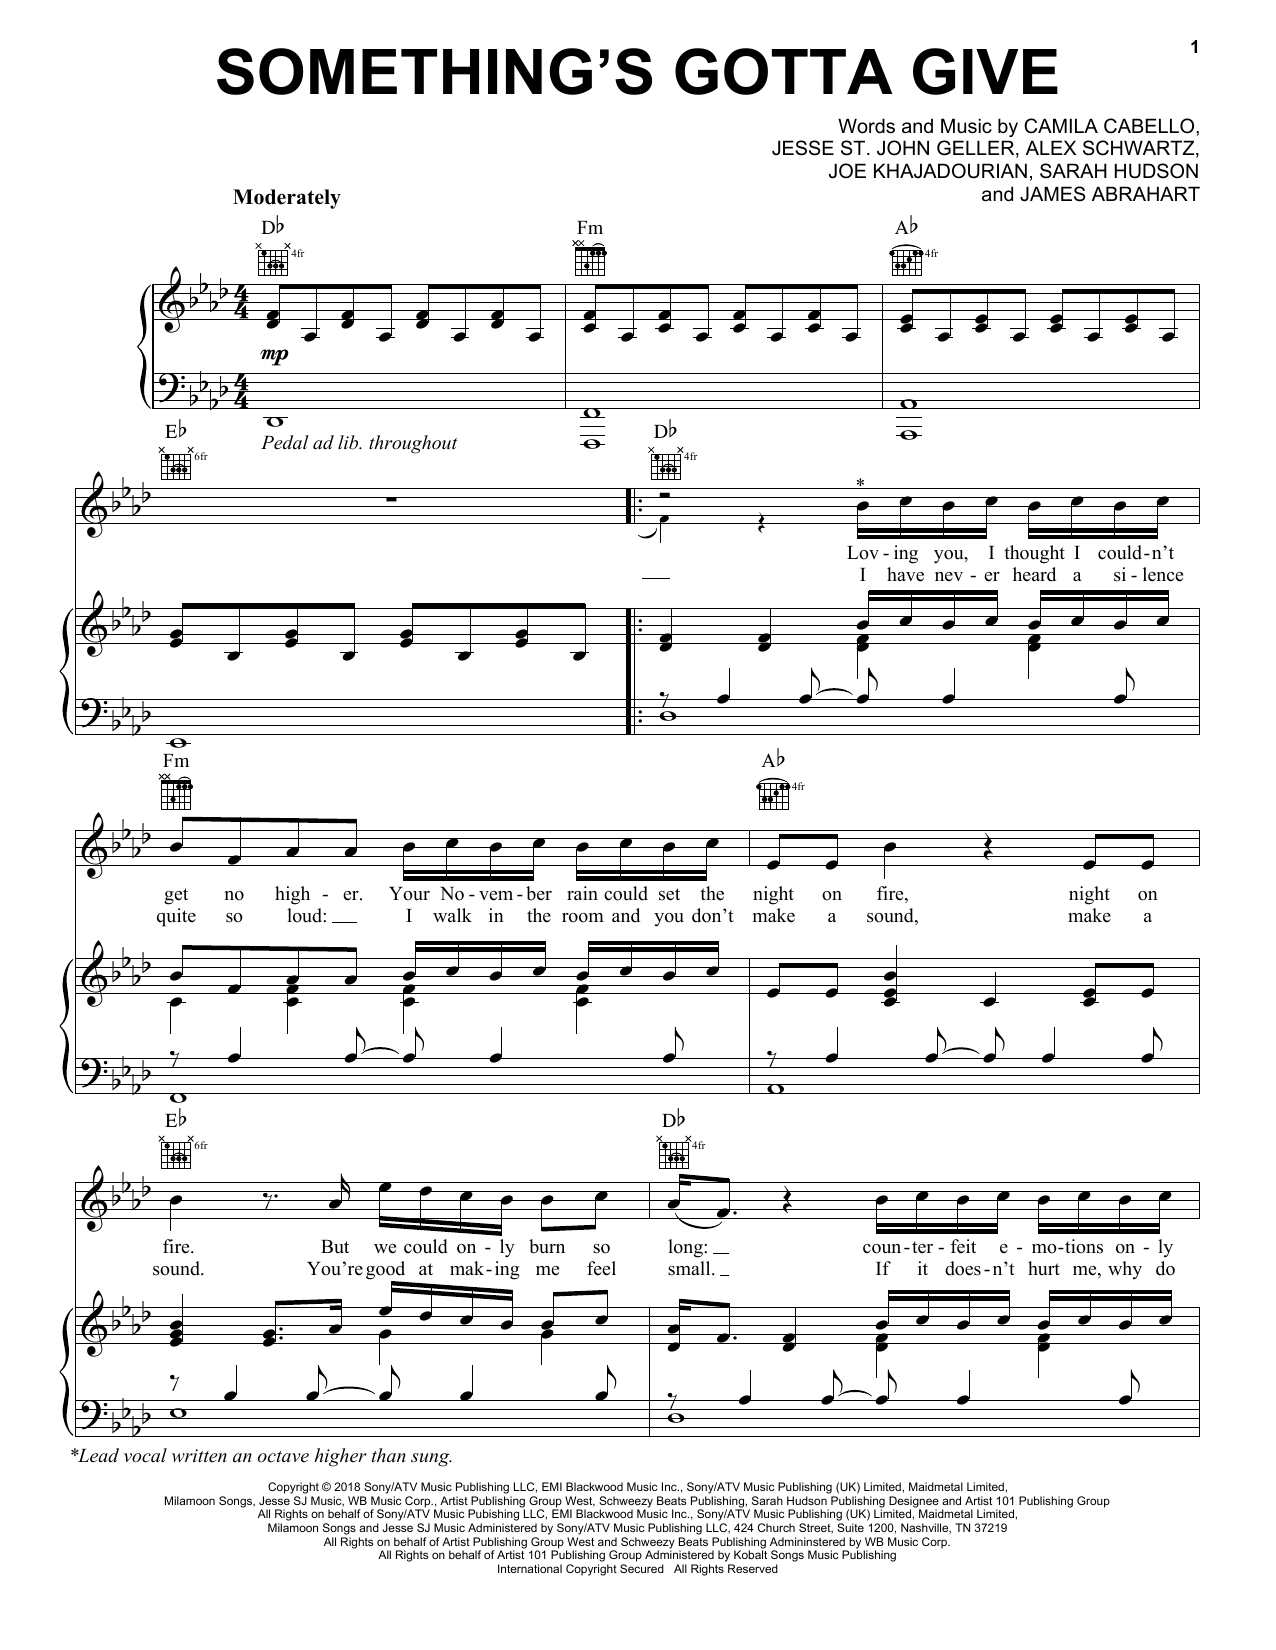 Download Camila Cabello Something's Gotta Give Sheet Music